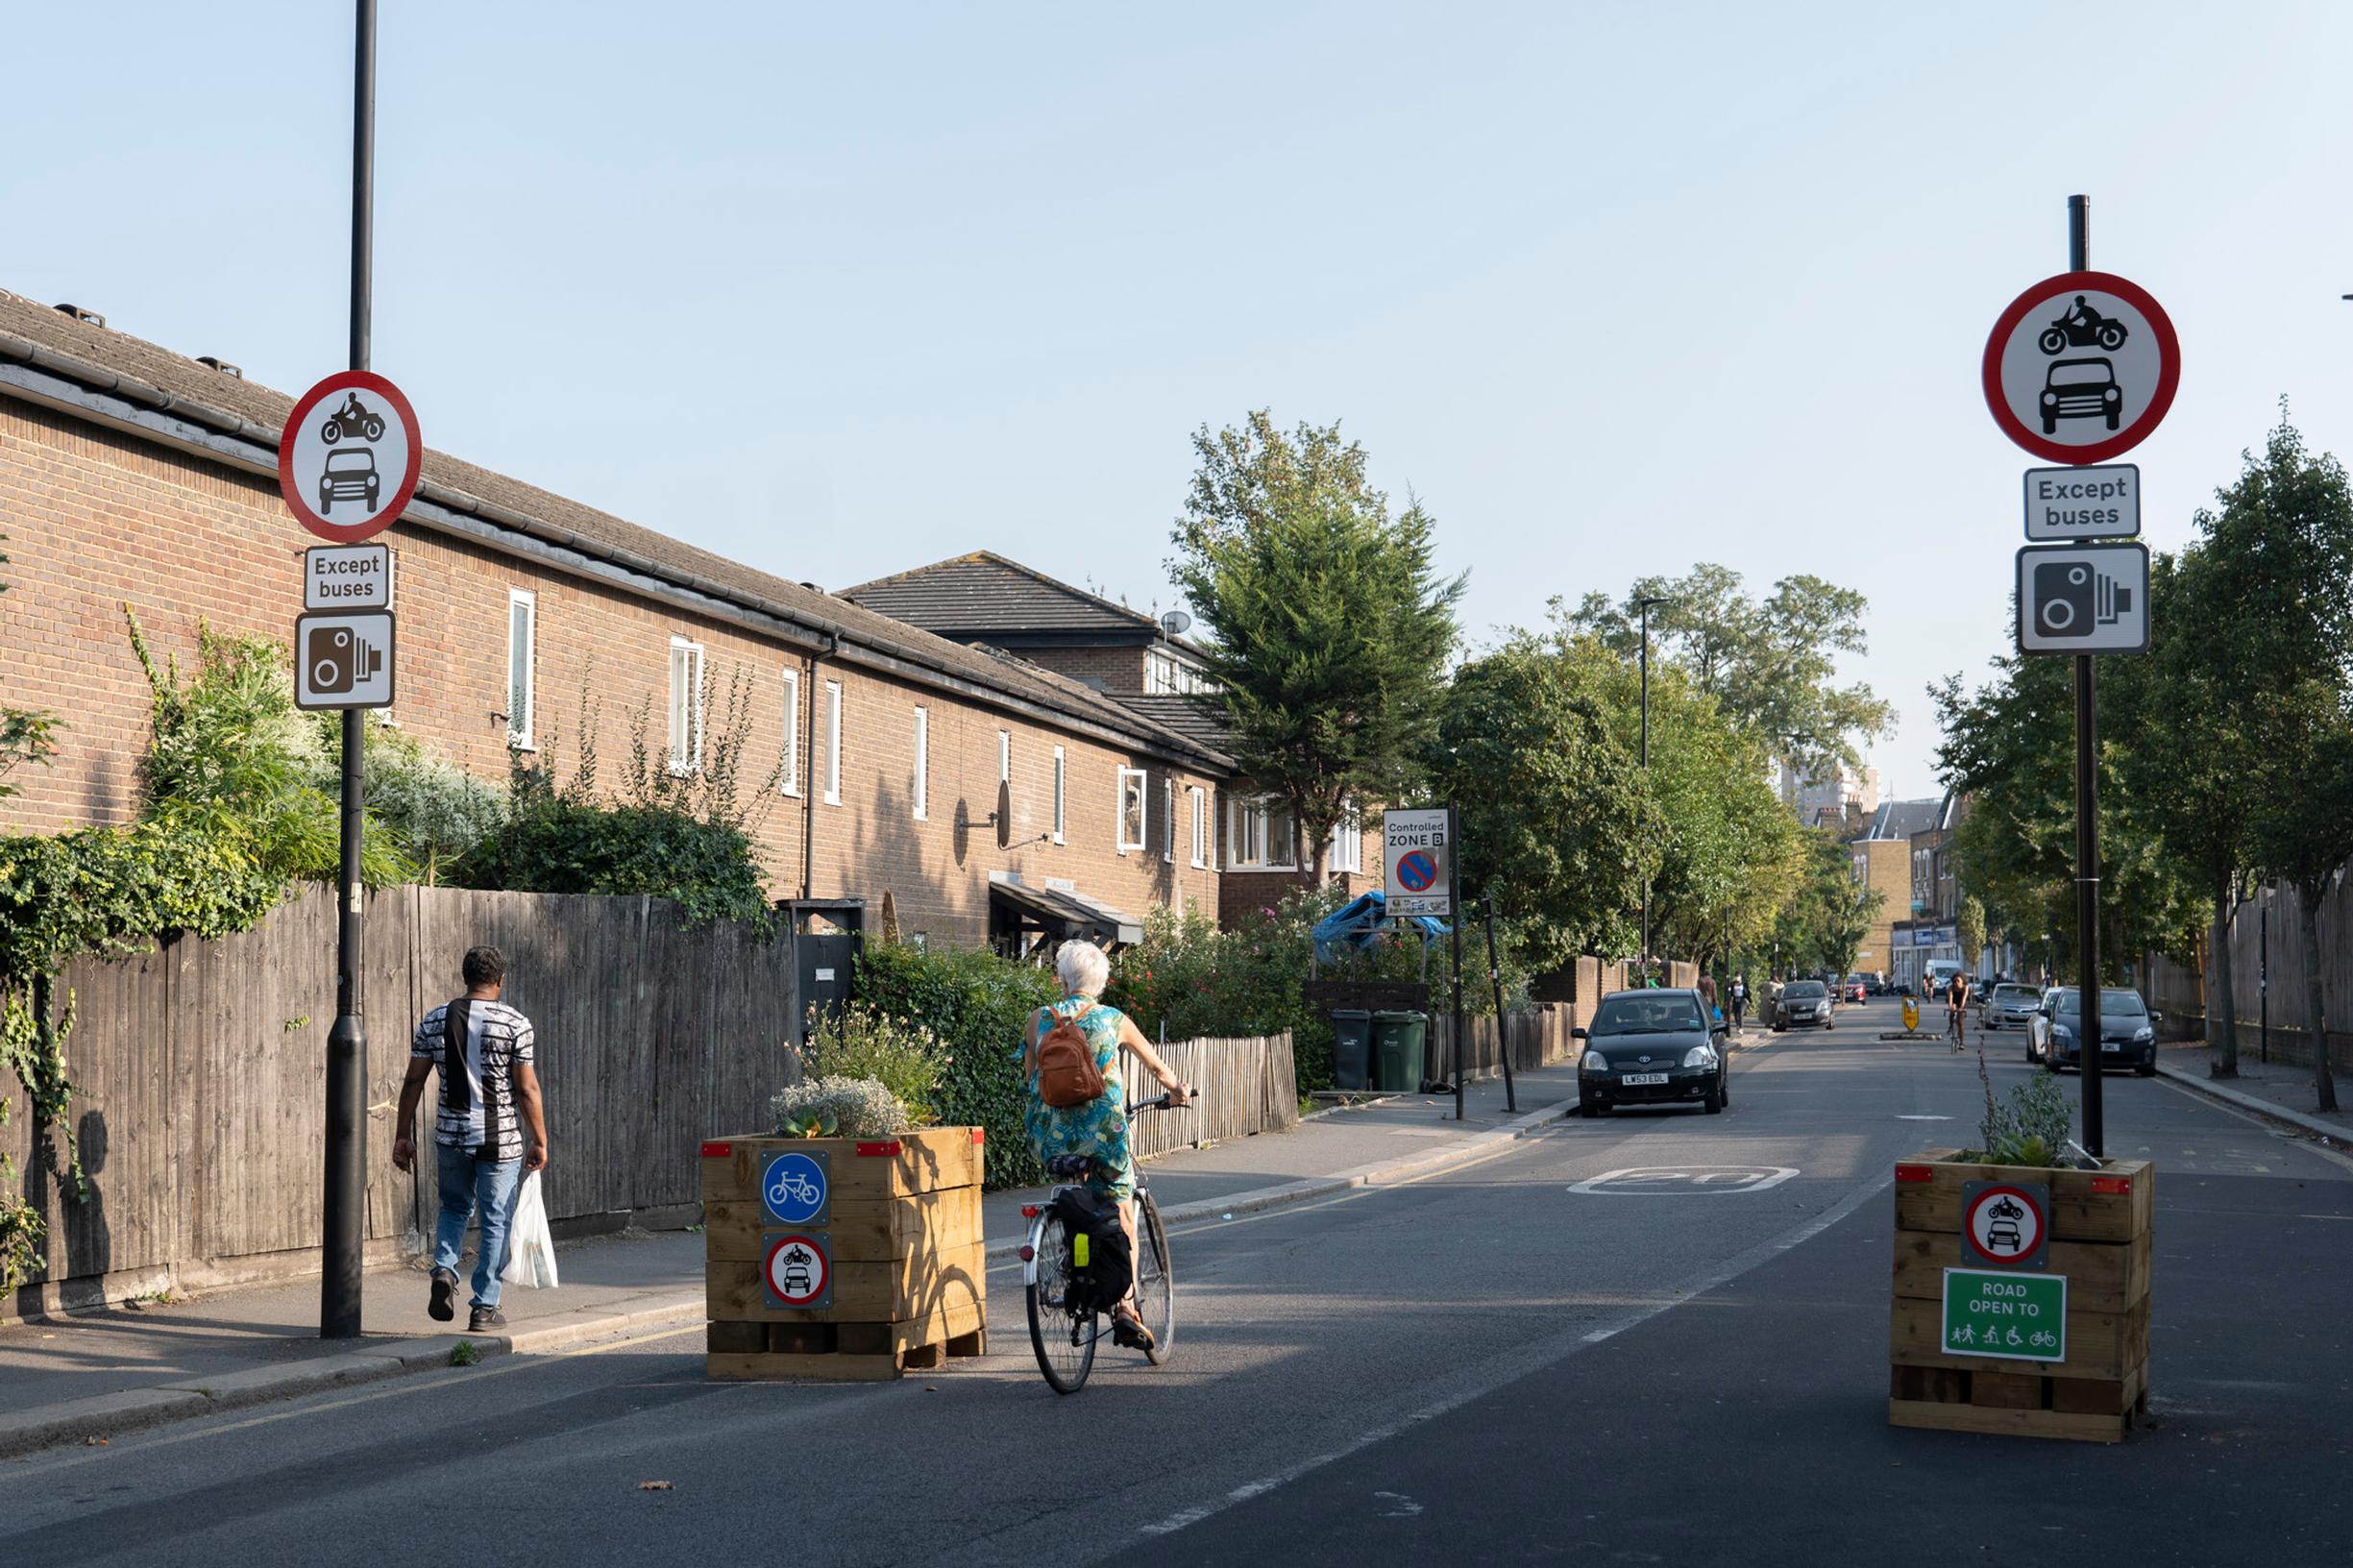 Construction work will take place to make five LTN schemes in Lambeth permanent, while three more LTN trials are set to start